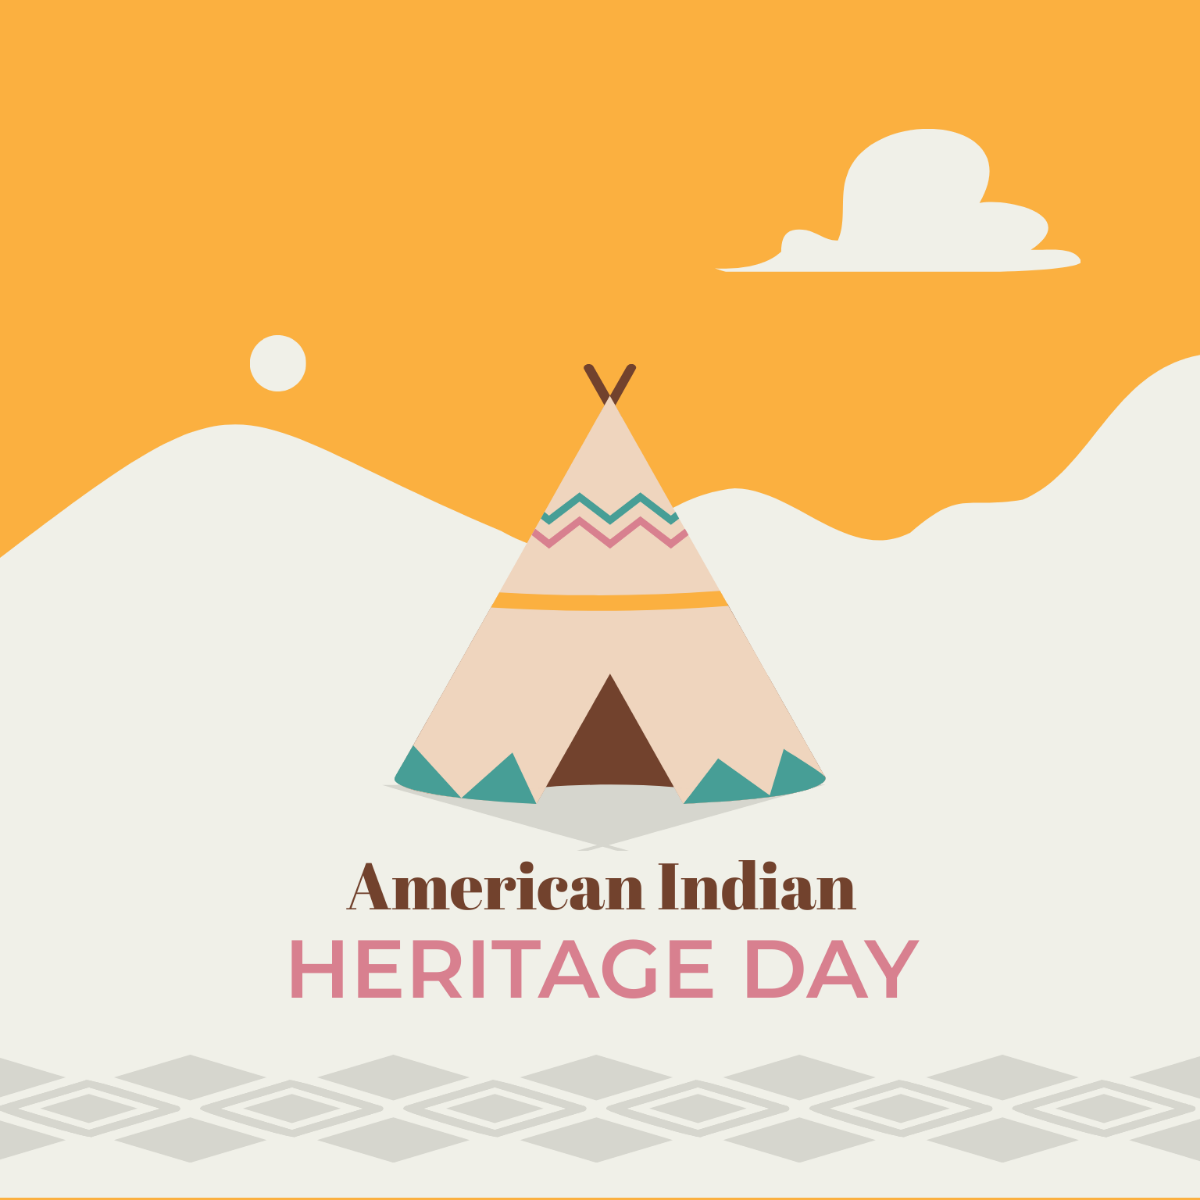 American Indian Heritage Day Illustration Template